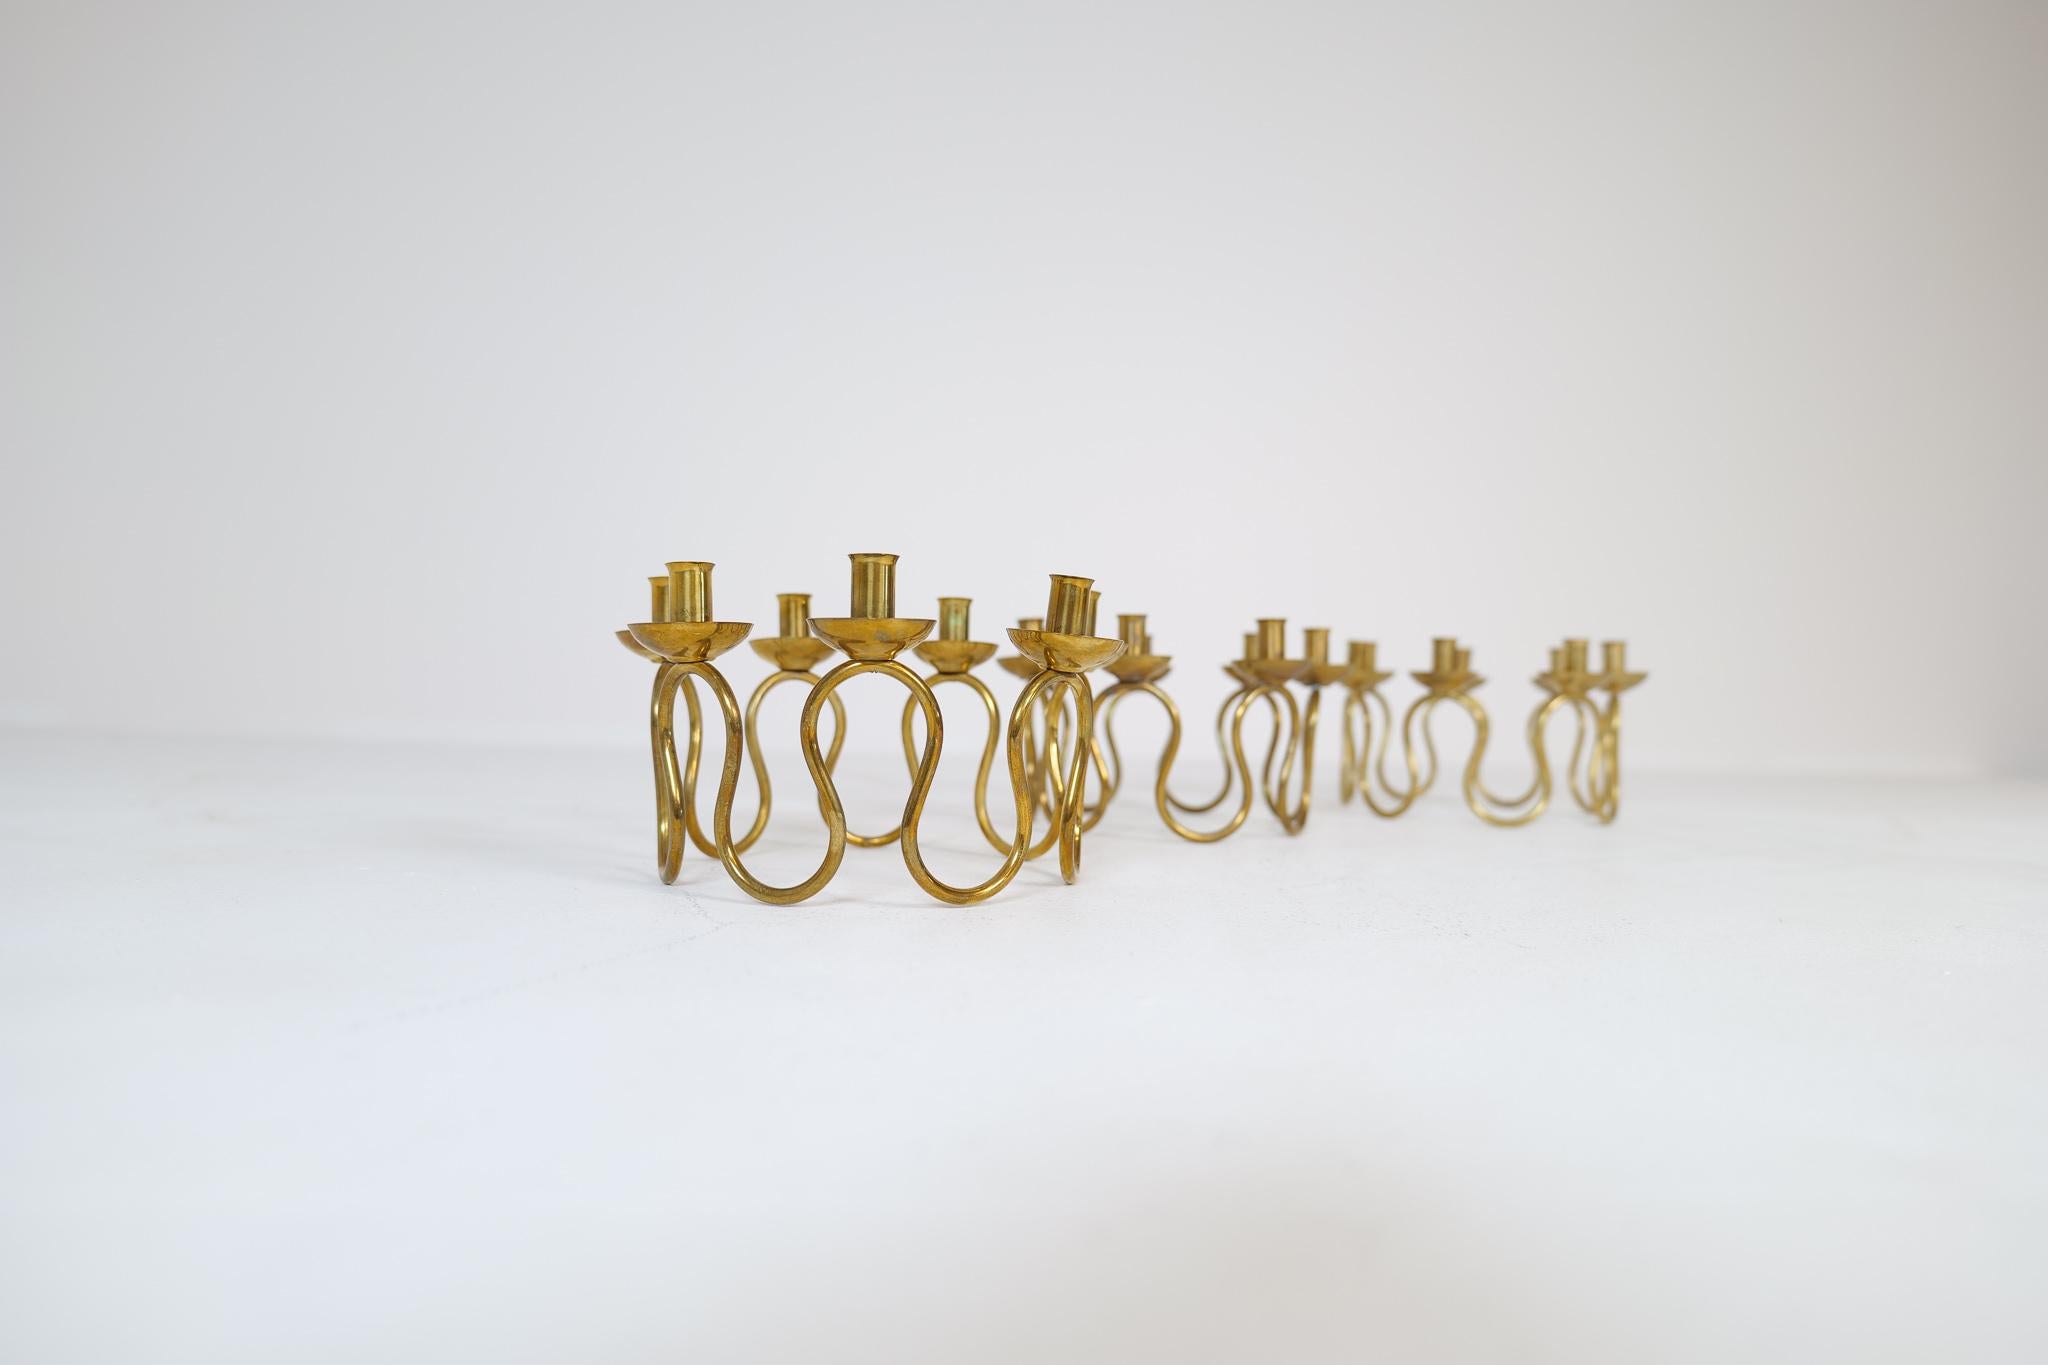 Midcentury brass candlestick designed by Lars Holmström. Produced by Lars Holmström in Arvika, Sweden.
Wonderfully handcrafted brass candlestick with that modern look. These three pieces was produced by Holmström and sold at Svensk Tenn location in